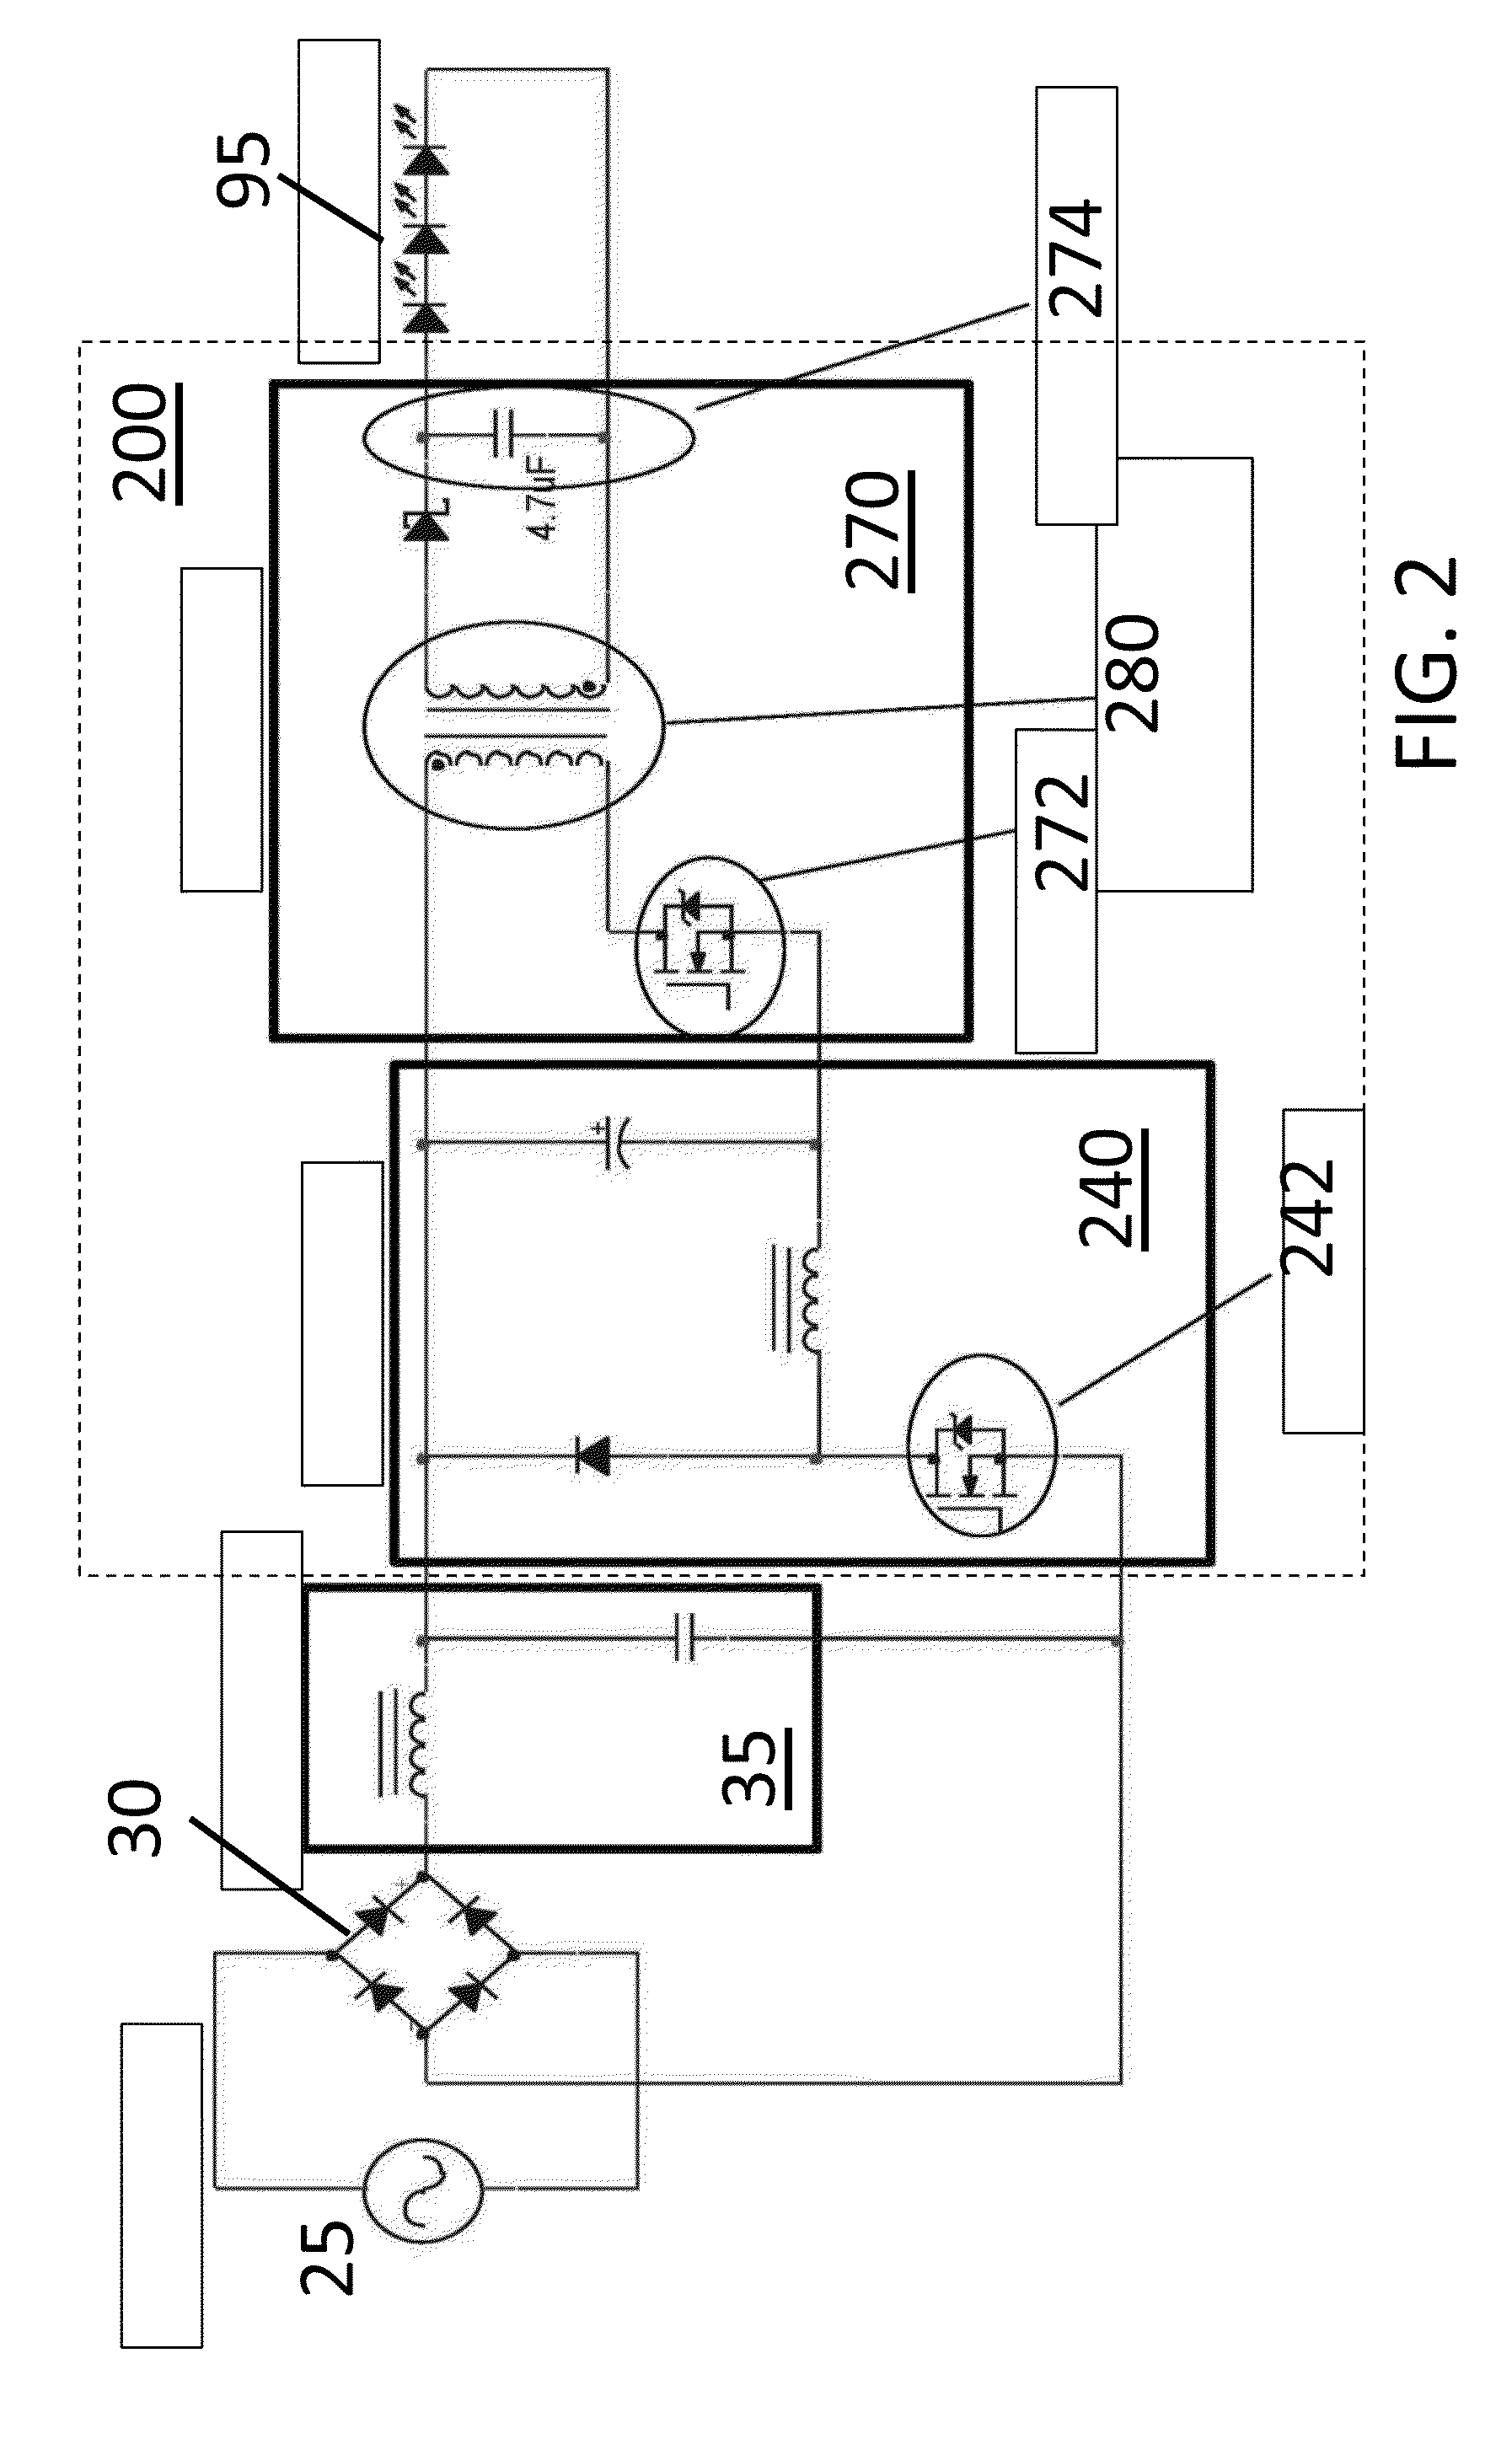 Single-stage ac-dc power converter with flyback pfc and selectable dual output current